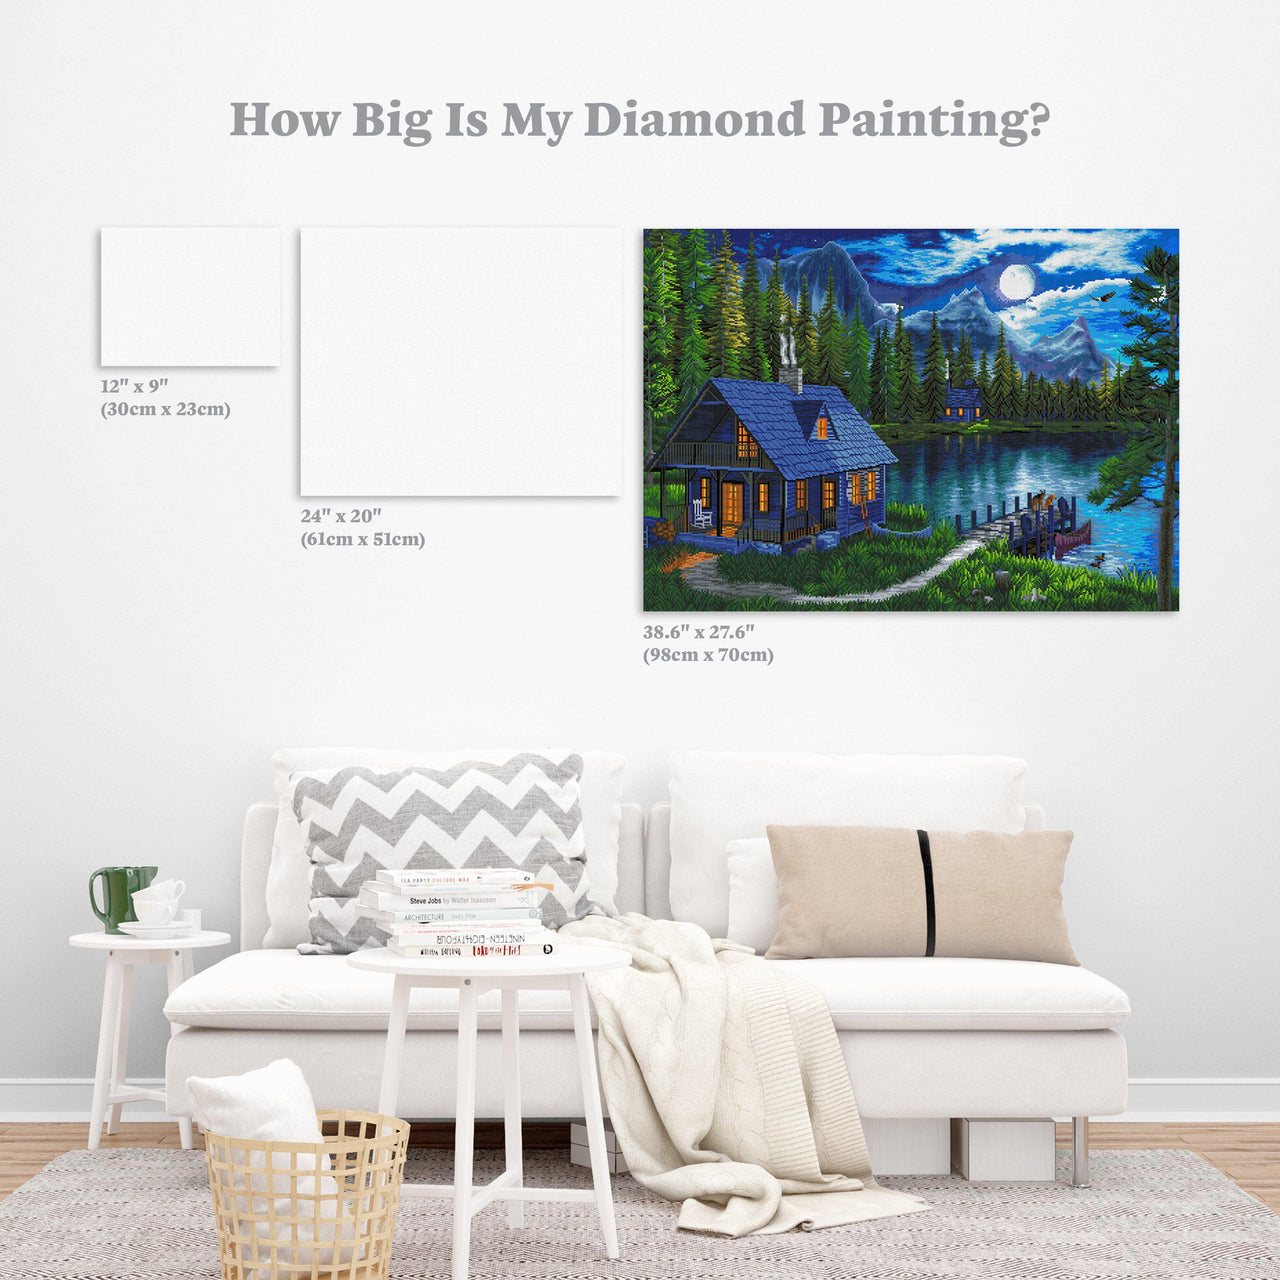 Diamond Painting Waiting for Master 38.6" x 27.6″ (98cm x 70cm) / Square with 55 Colors including 4 ABs / 107,474